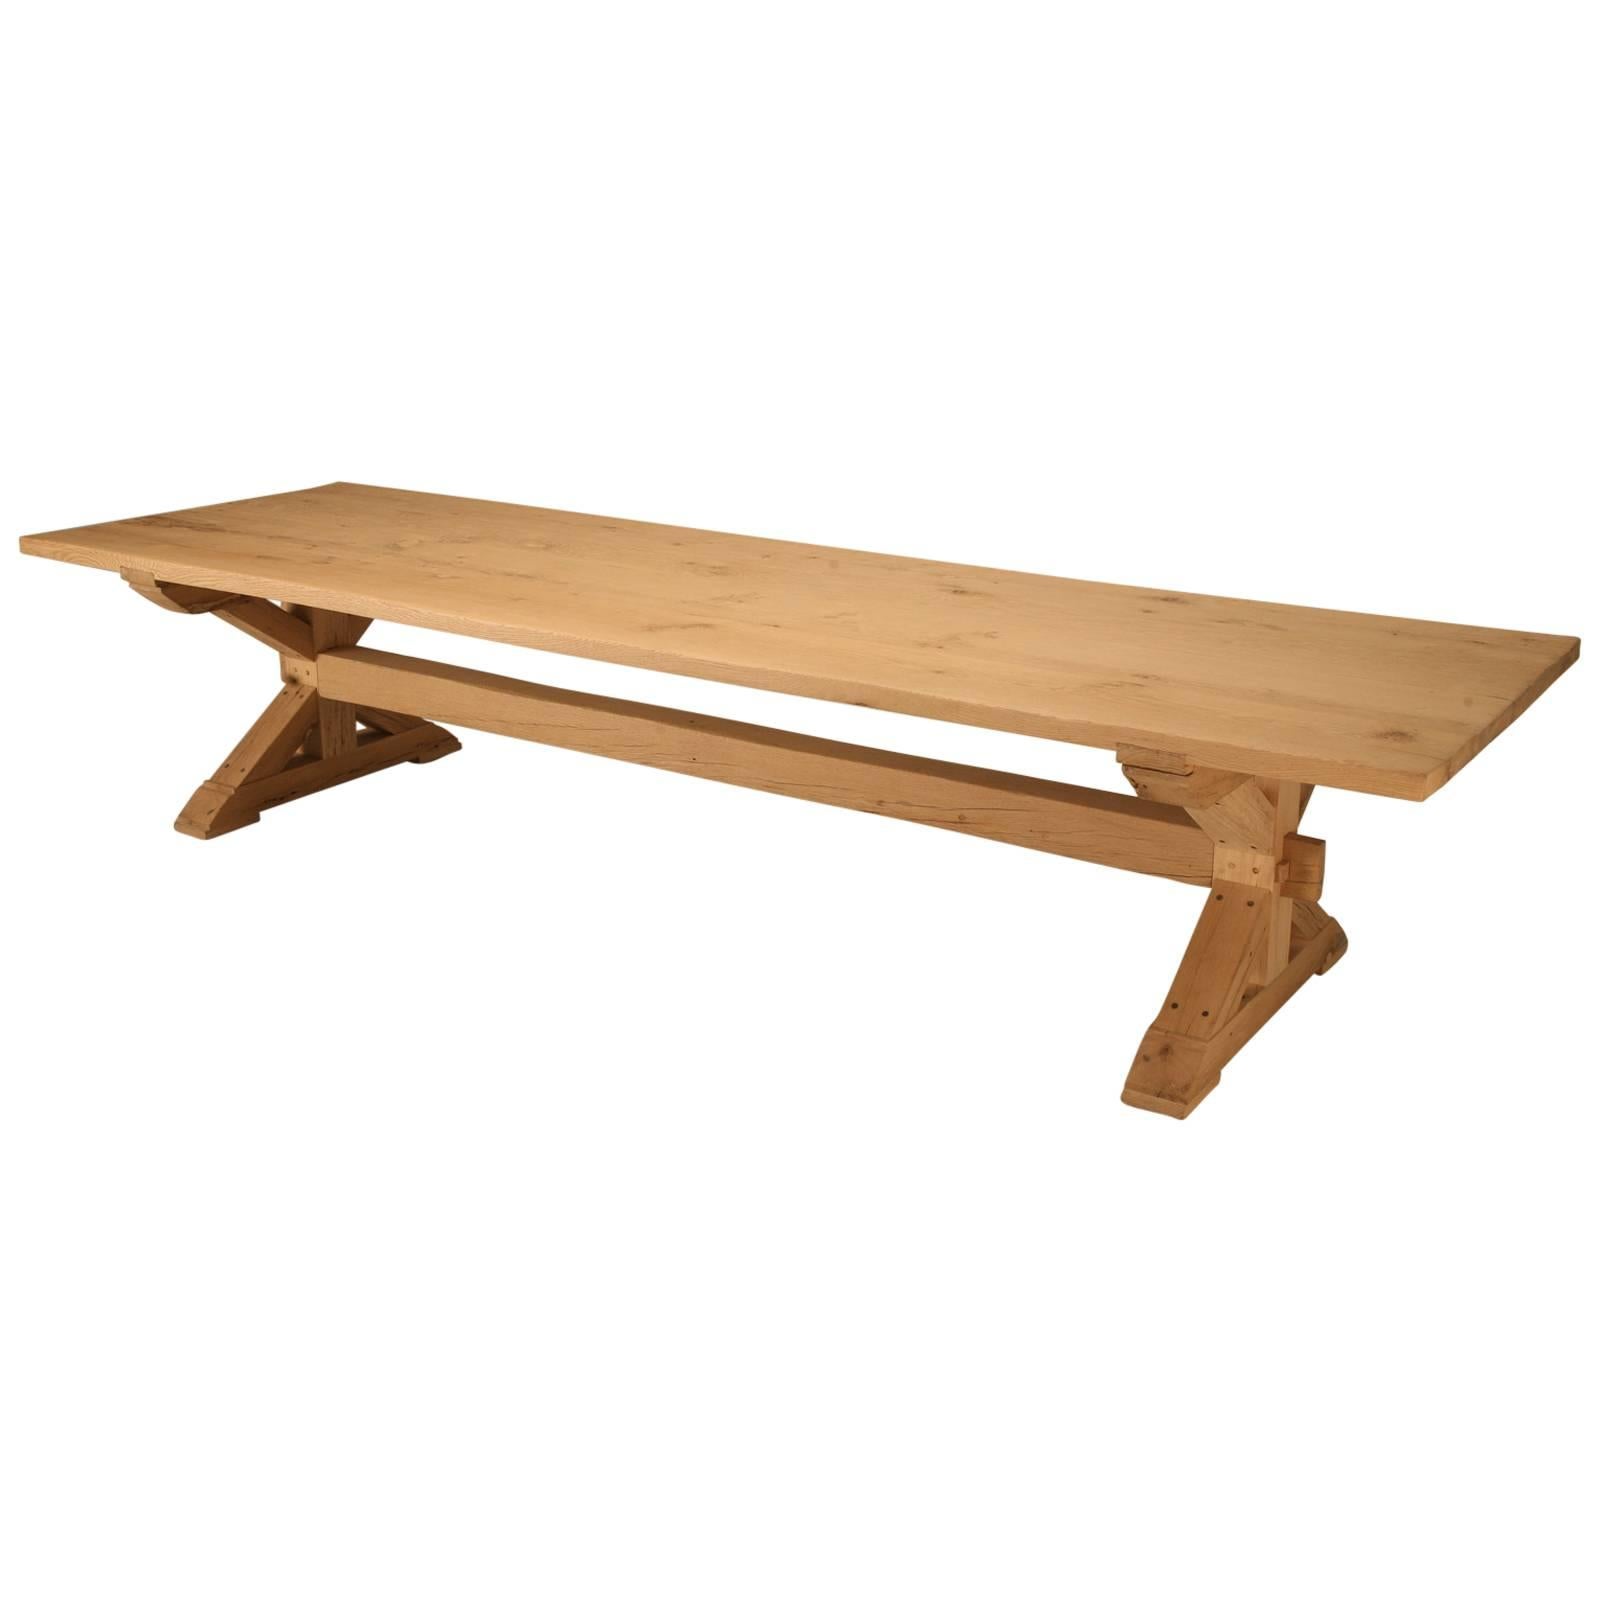 Custom Made Farm Table in Reclaimed White Oak Available Any Size by Old Plank For Sale